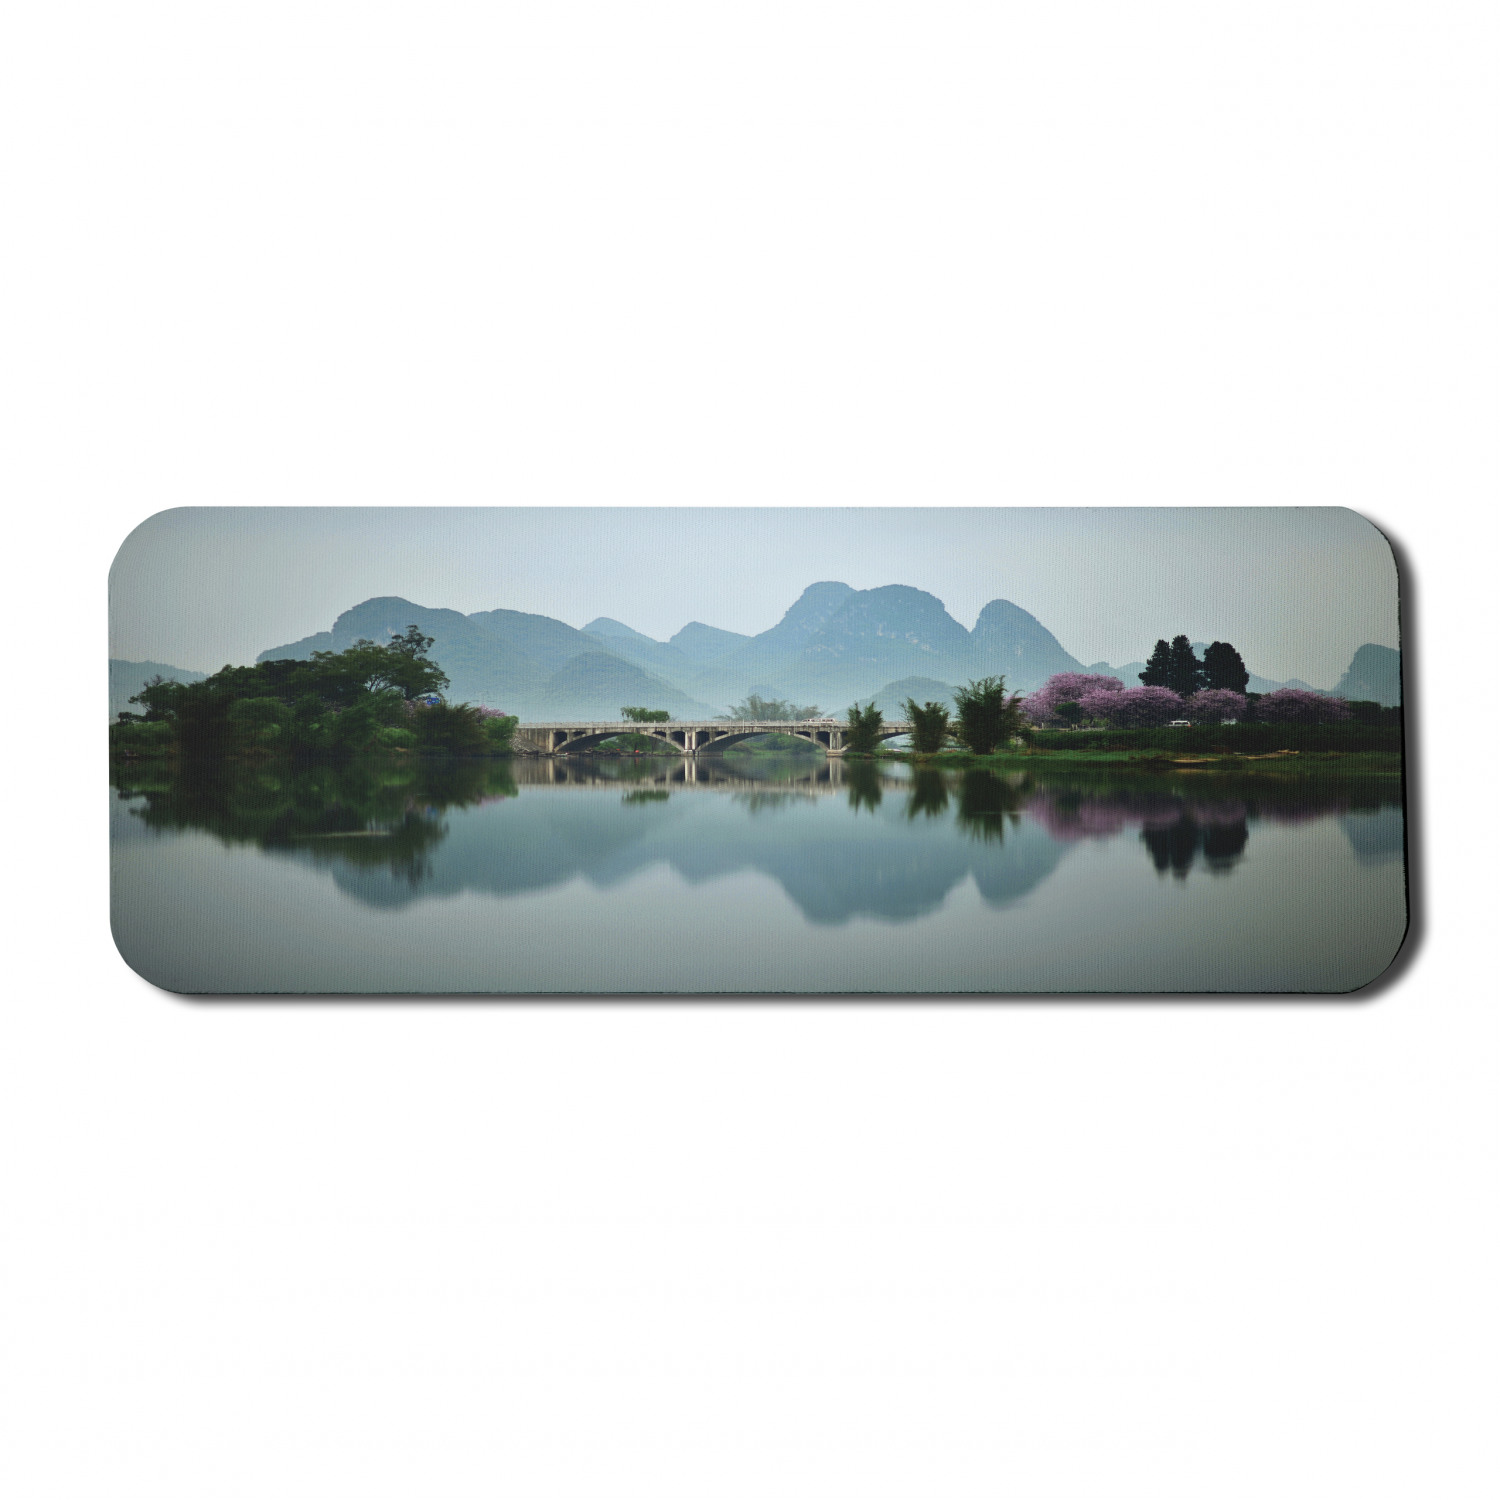 Japanese Computer Mouse Pad, Japanese National Park Bridge Reflections of the Mount on the Lake Scenery Photo, Rectangle Non-Slip Rubber Mousepad Large, 31" x 12", Multicolor, by Ambesonne - image 1 of 2